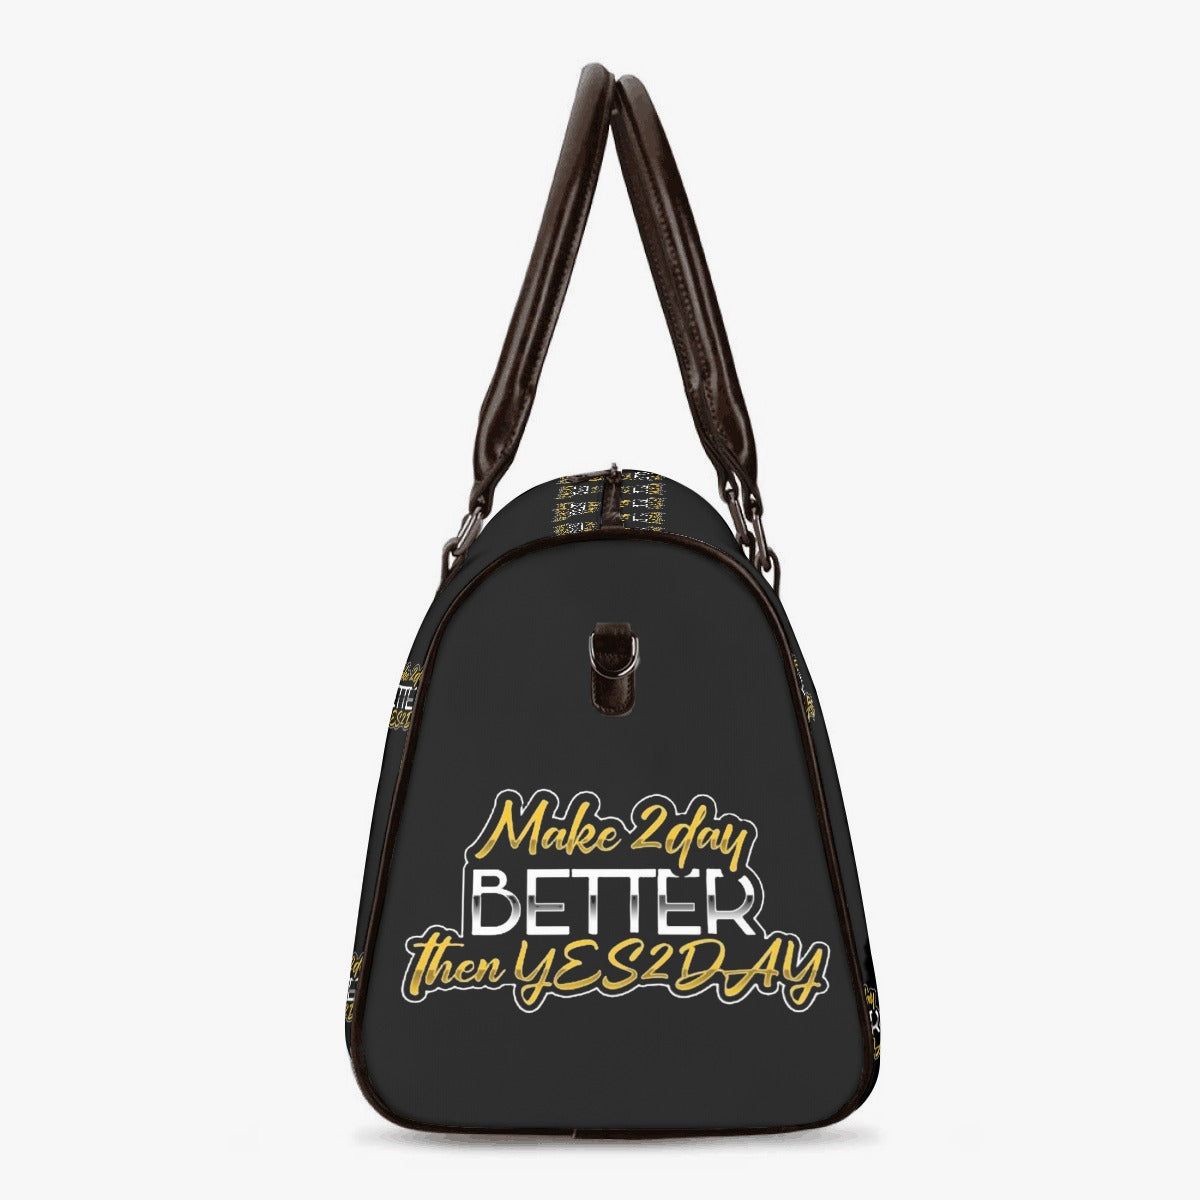 Make 2Day Better Then YES2DAY Duffle Bag